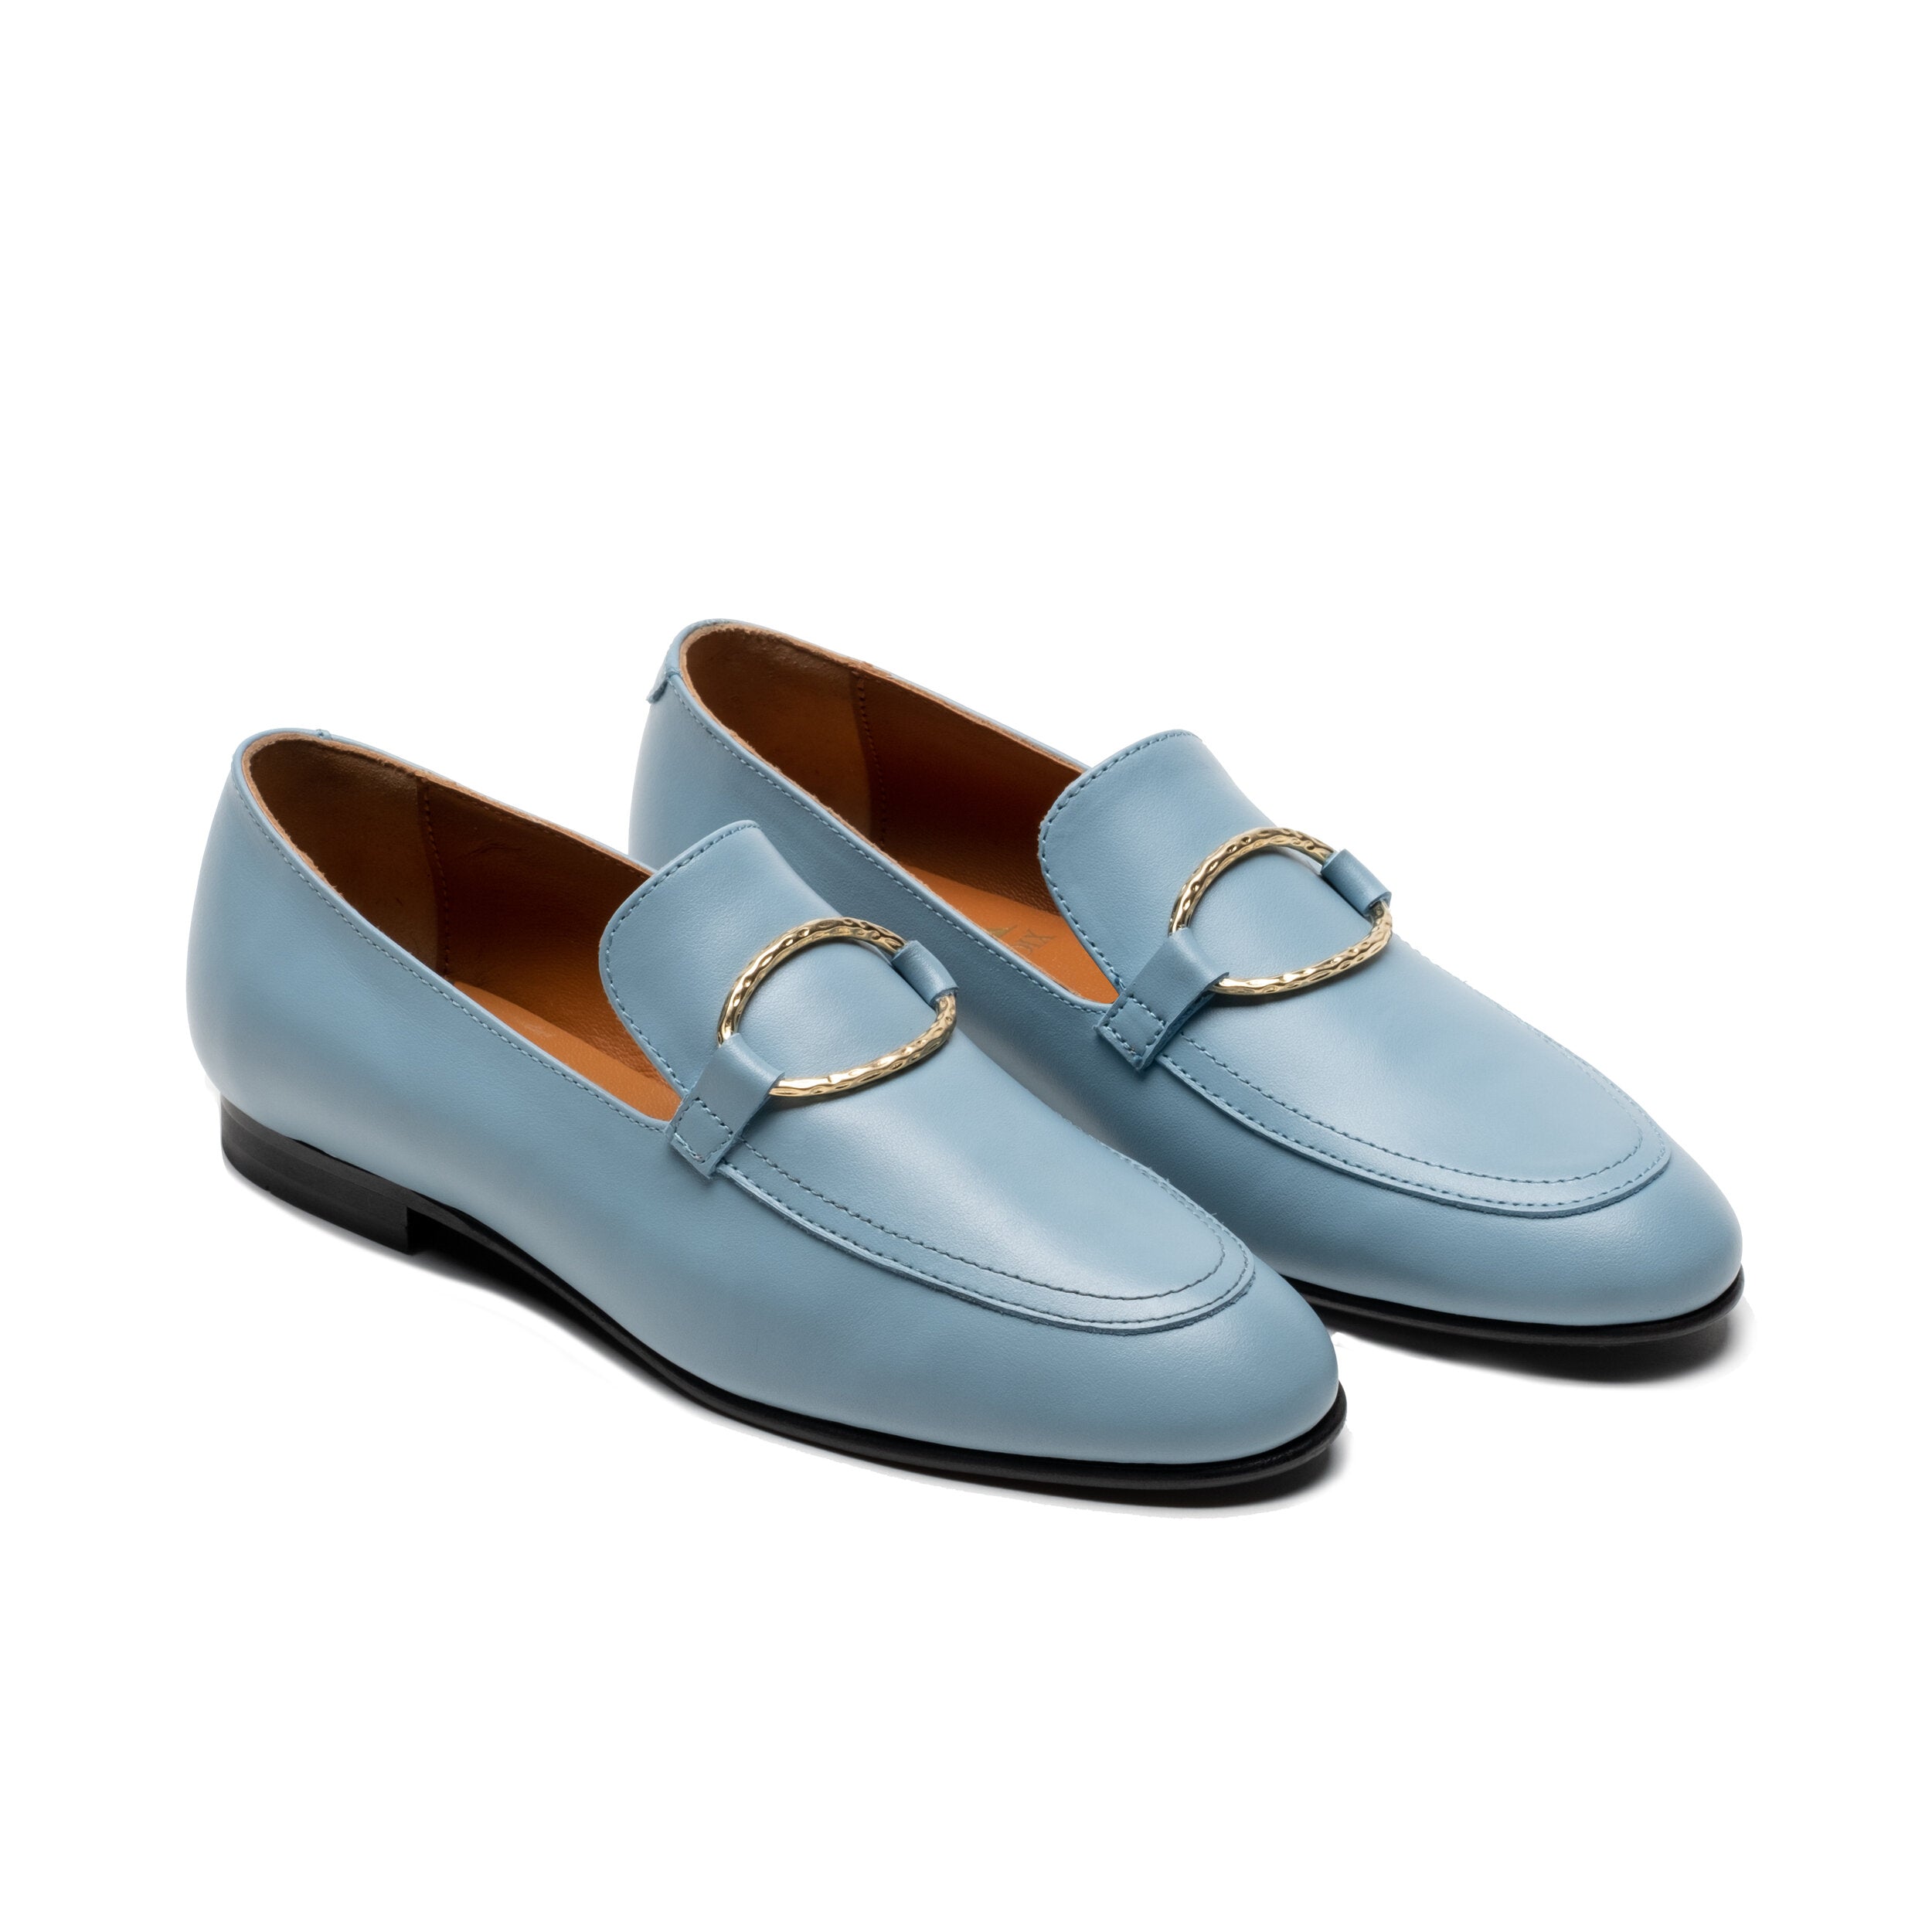 Essentials – Lachoix | Loafers made in Portugal